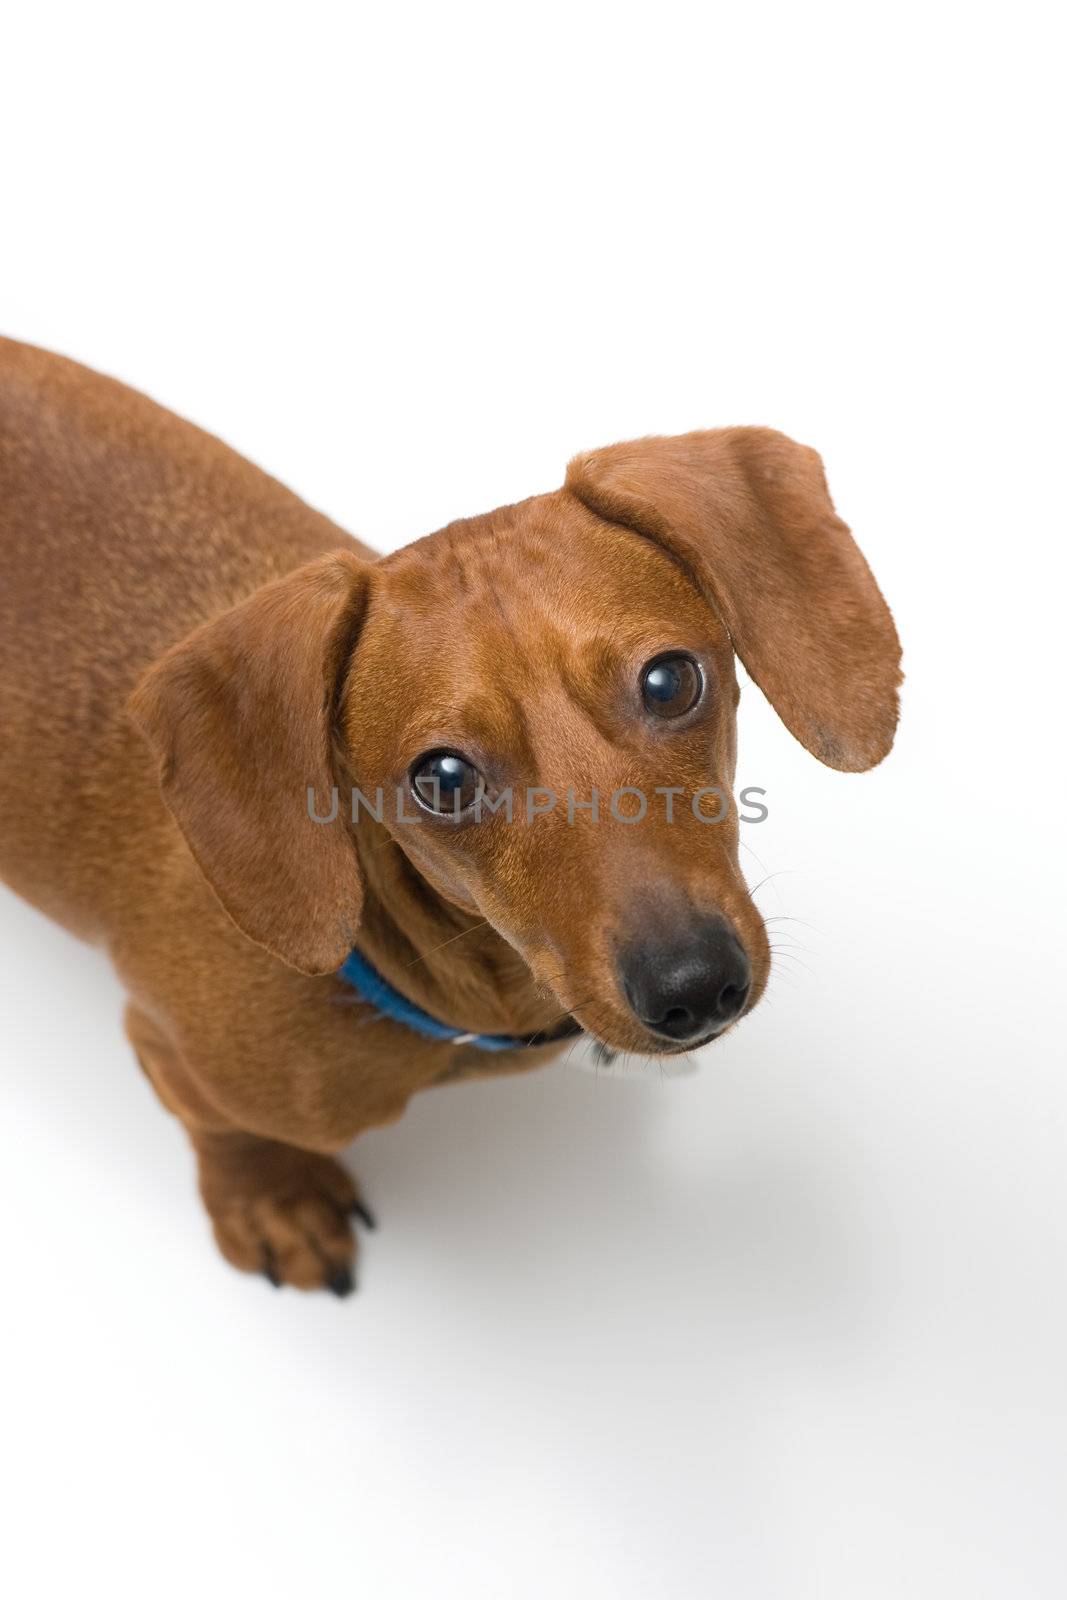 A miniature Dachshund Purebred dog, isolated on white background, looking up at the camera.